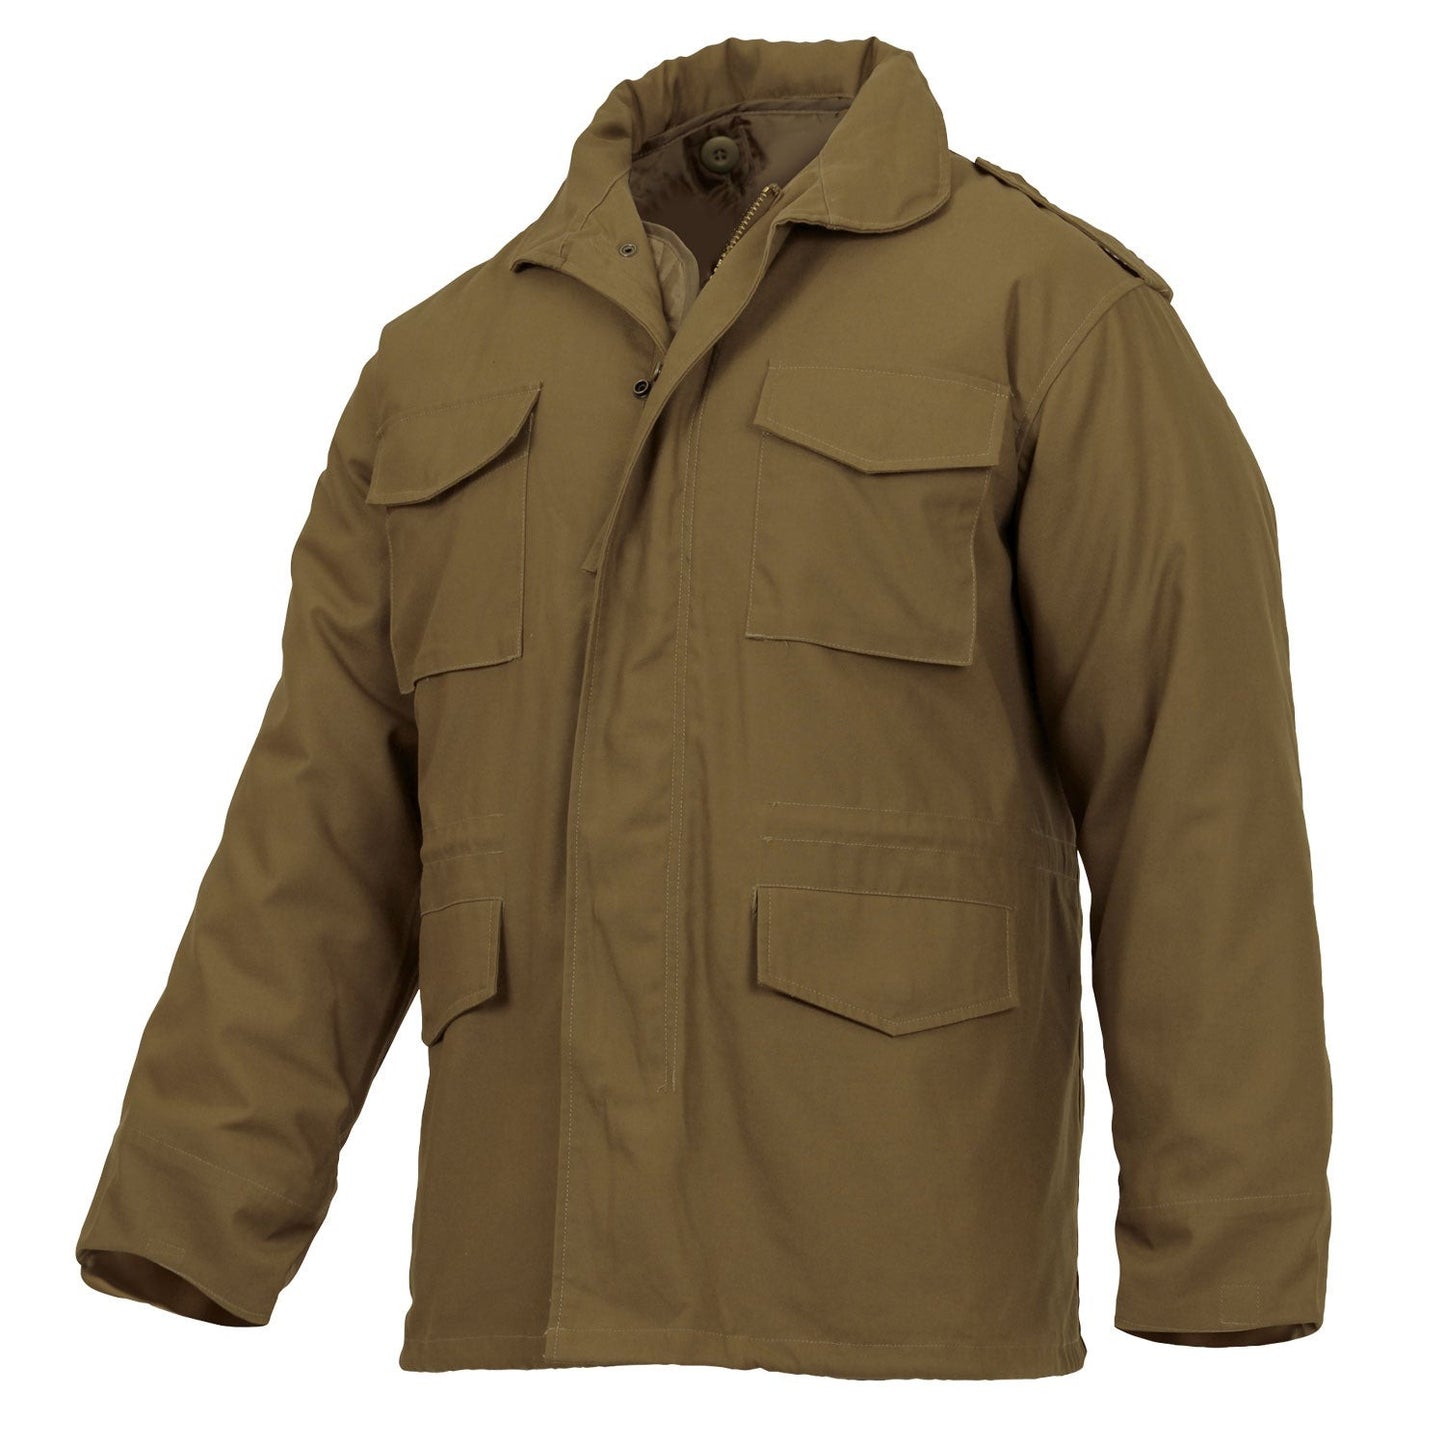 The M-65 Field Jacket from Rothco was made to military specifications (The M-65 was implemented by the U.S. Army and  US Marine Corps in 1965) and is designed to provide unparalleled warmth, durability, and comfort in any cold weather condition.